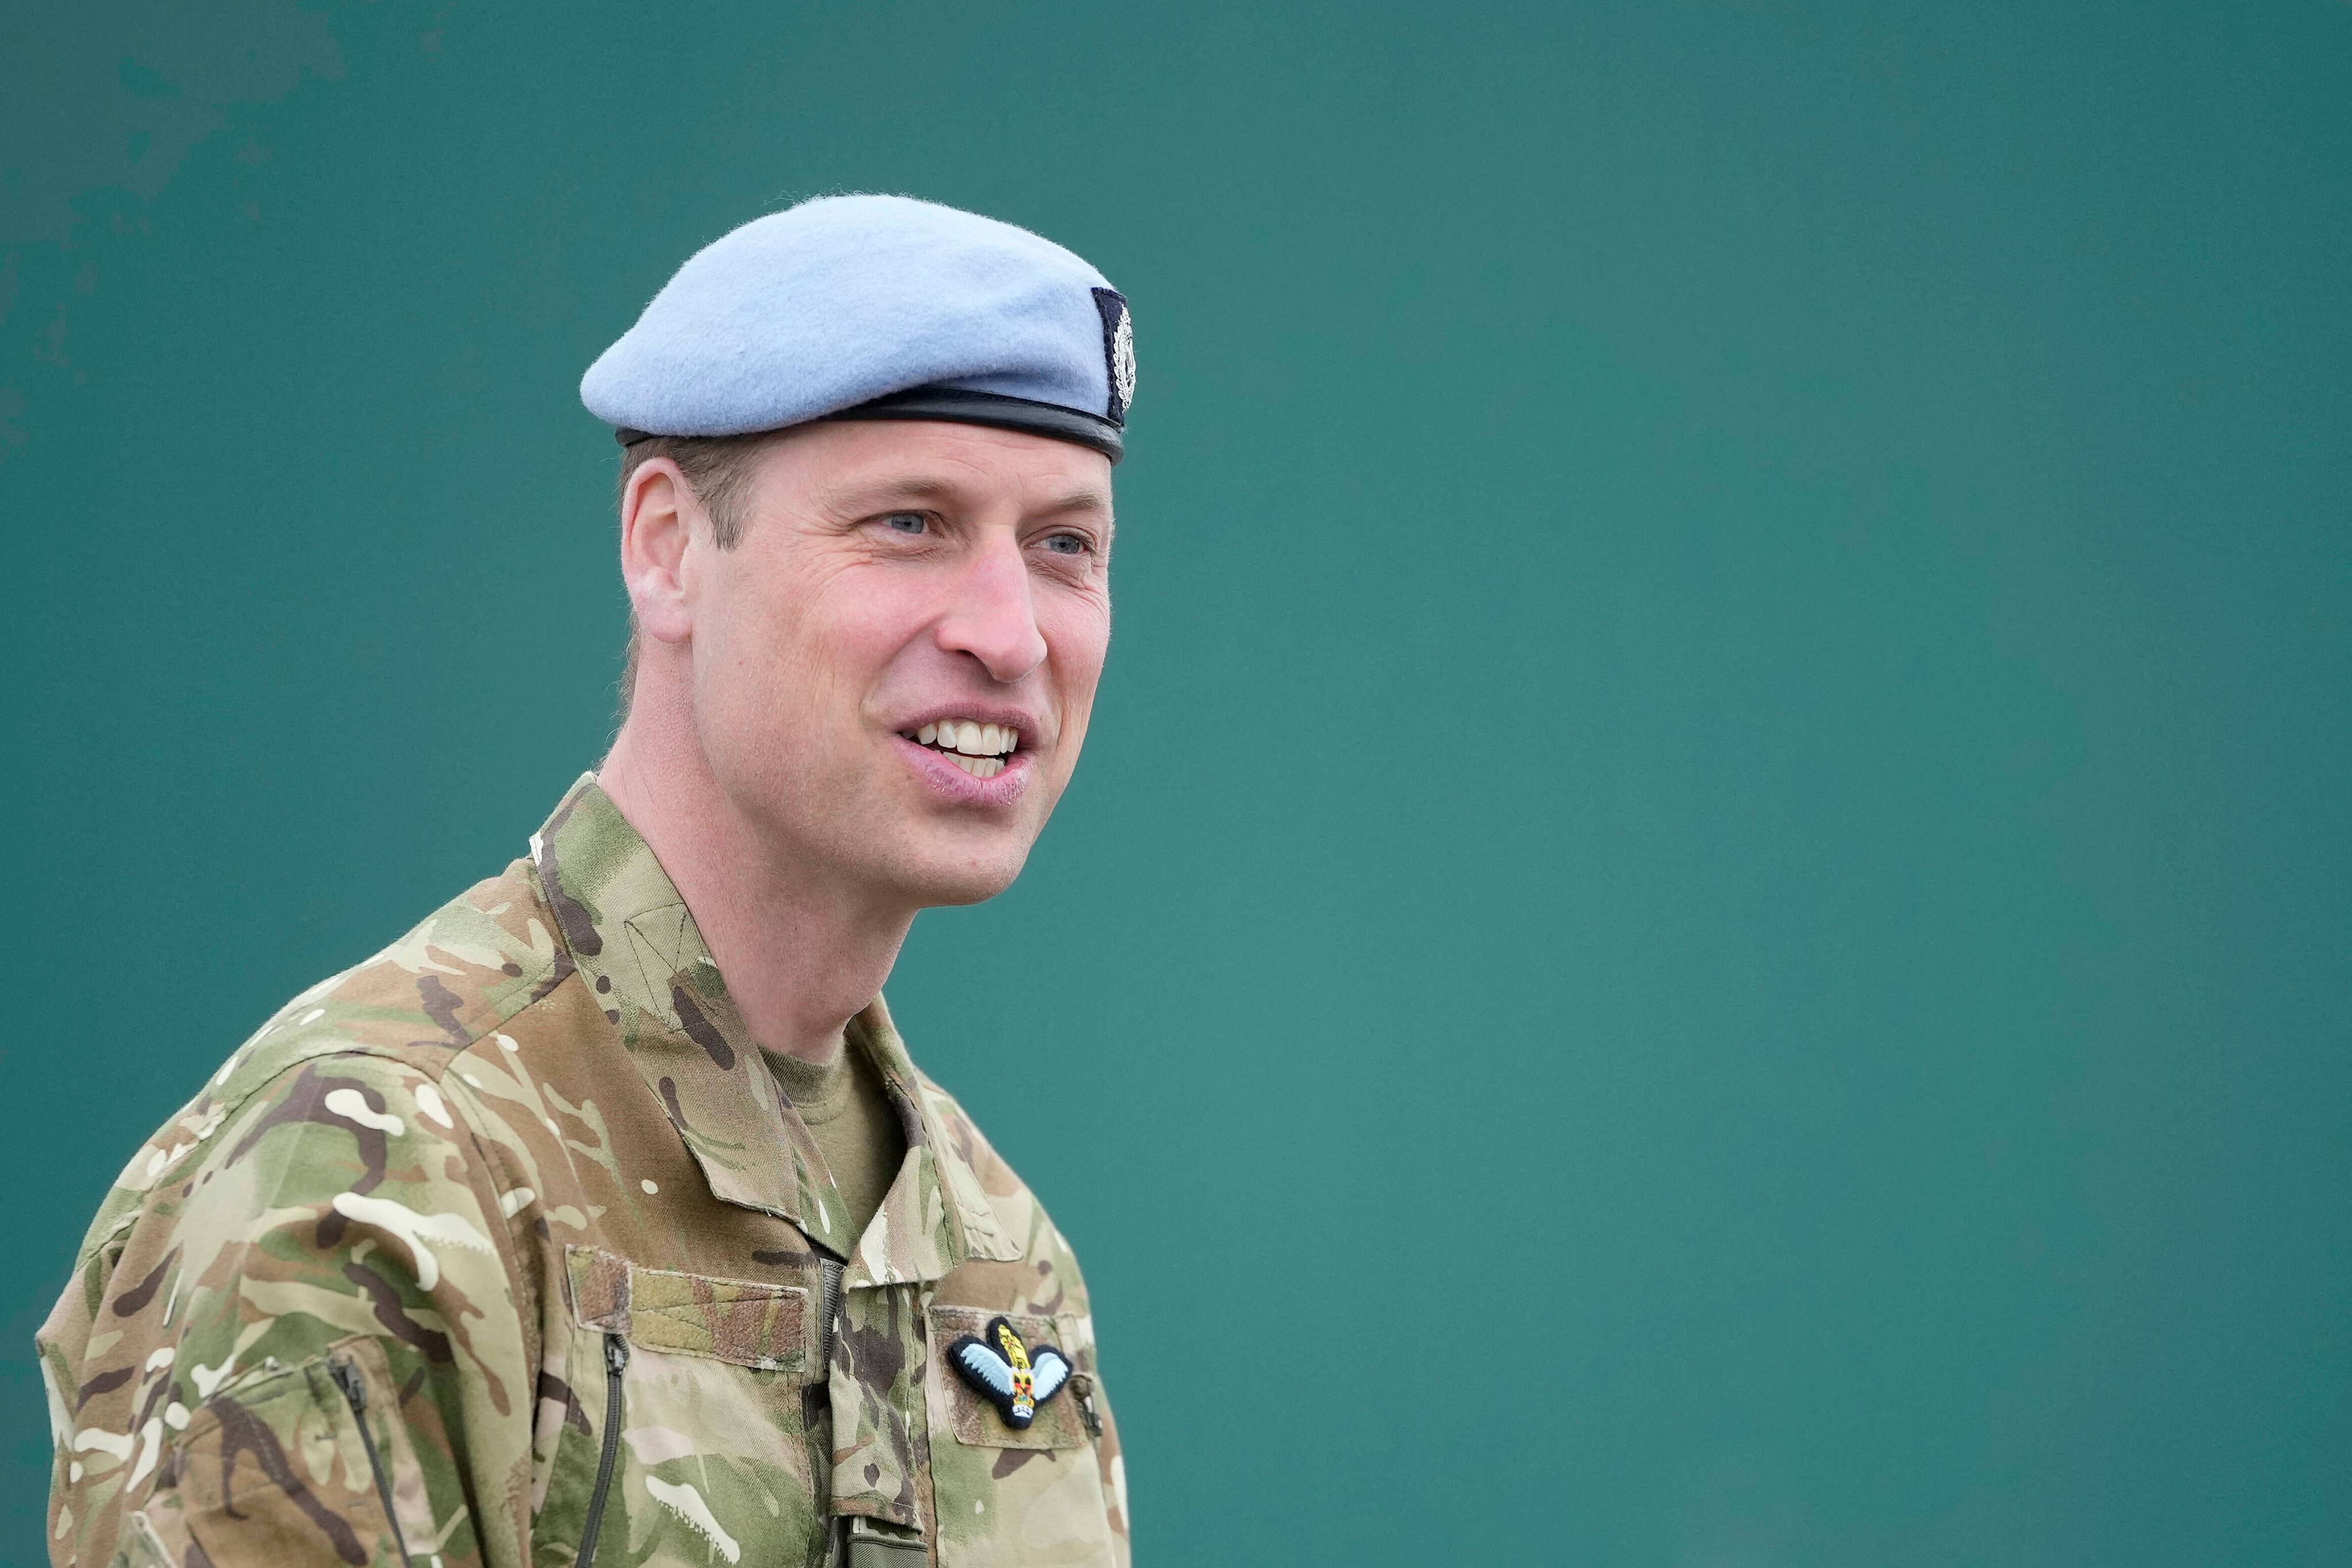 Britain’s Prince William, Prince of Wales speaks to service personal at the Army Aviation Centre in Middle Wallop, England on Monday. Photo: Pool/AFP